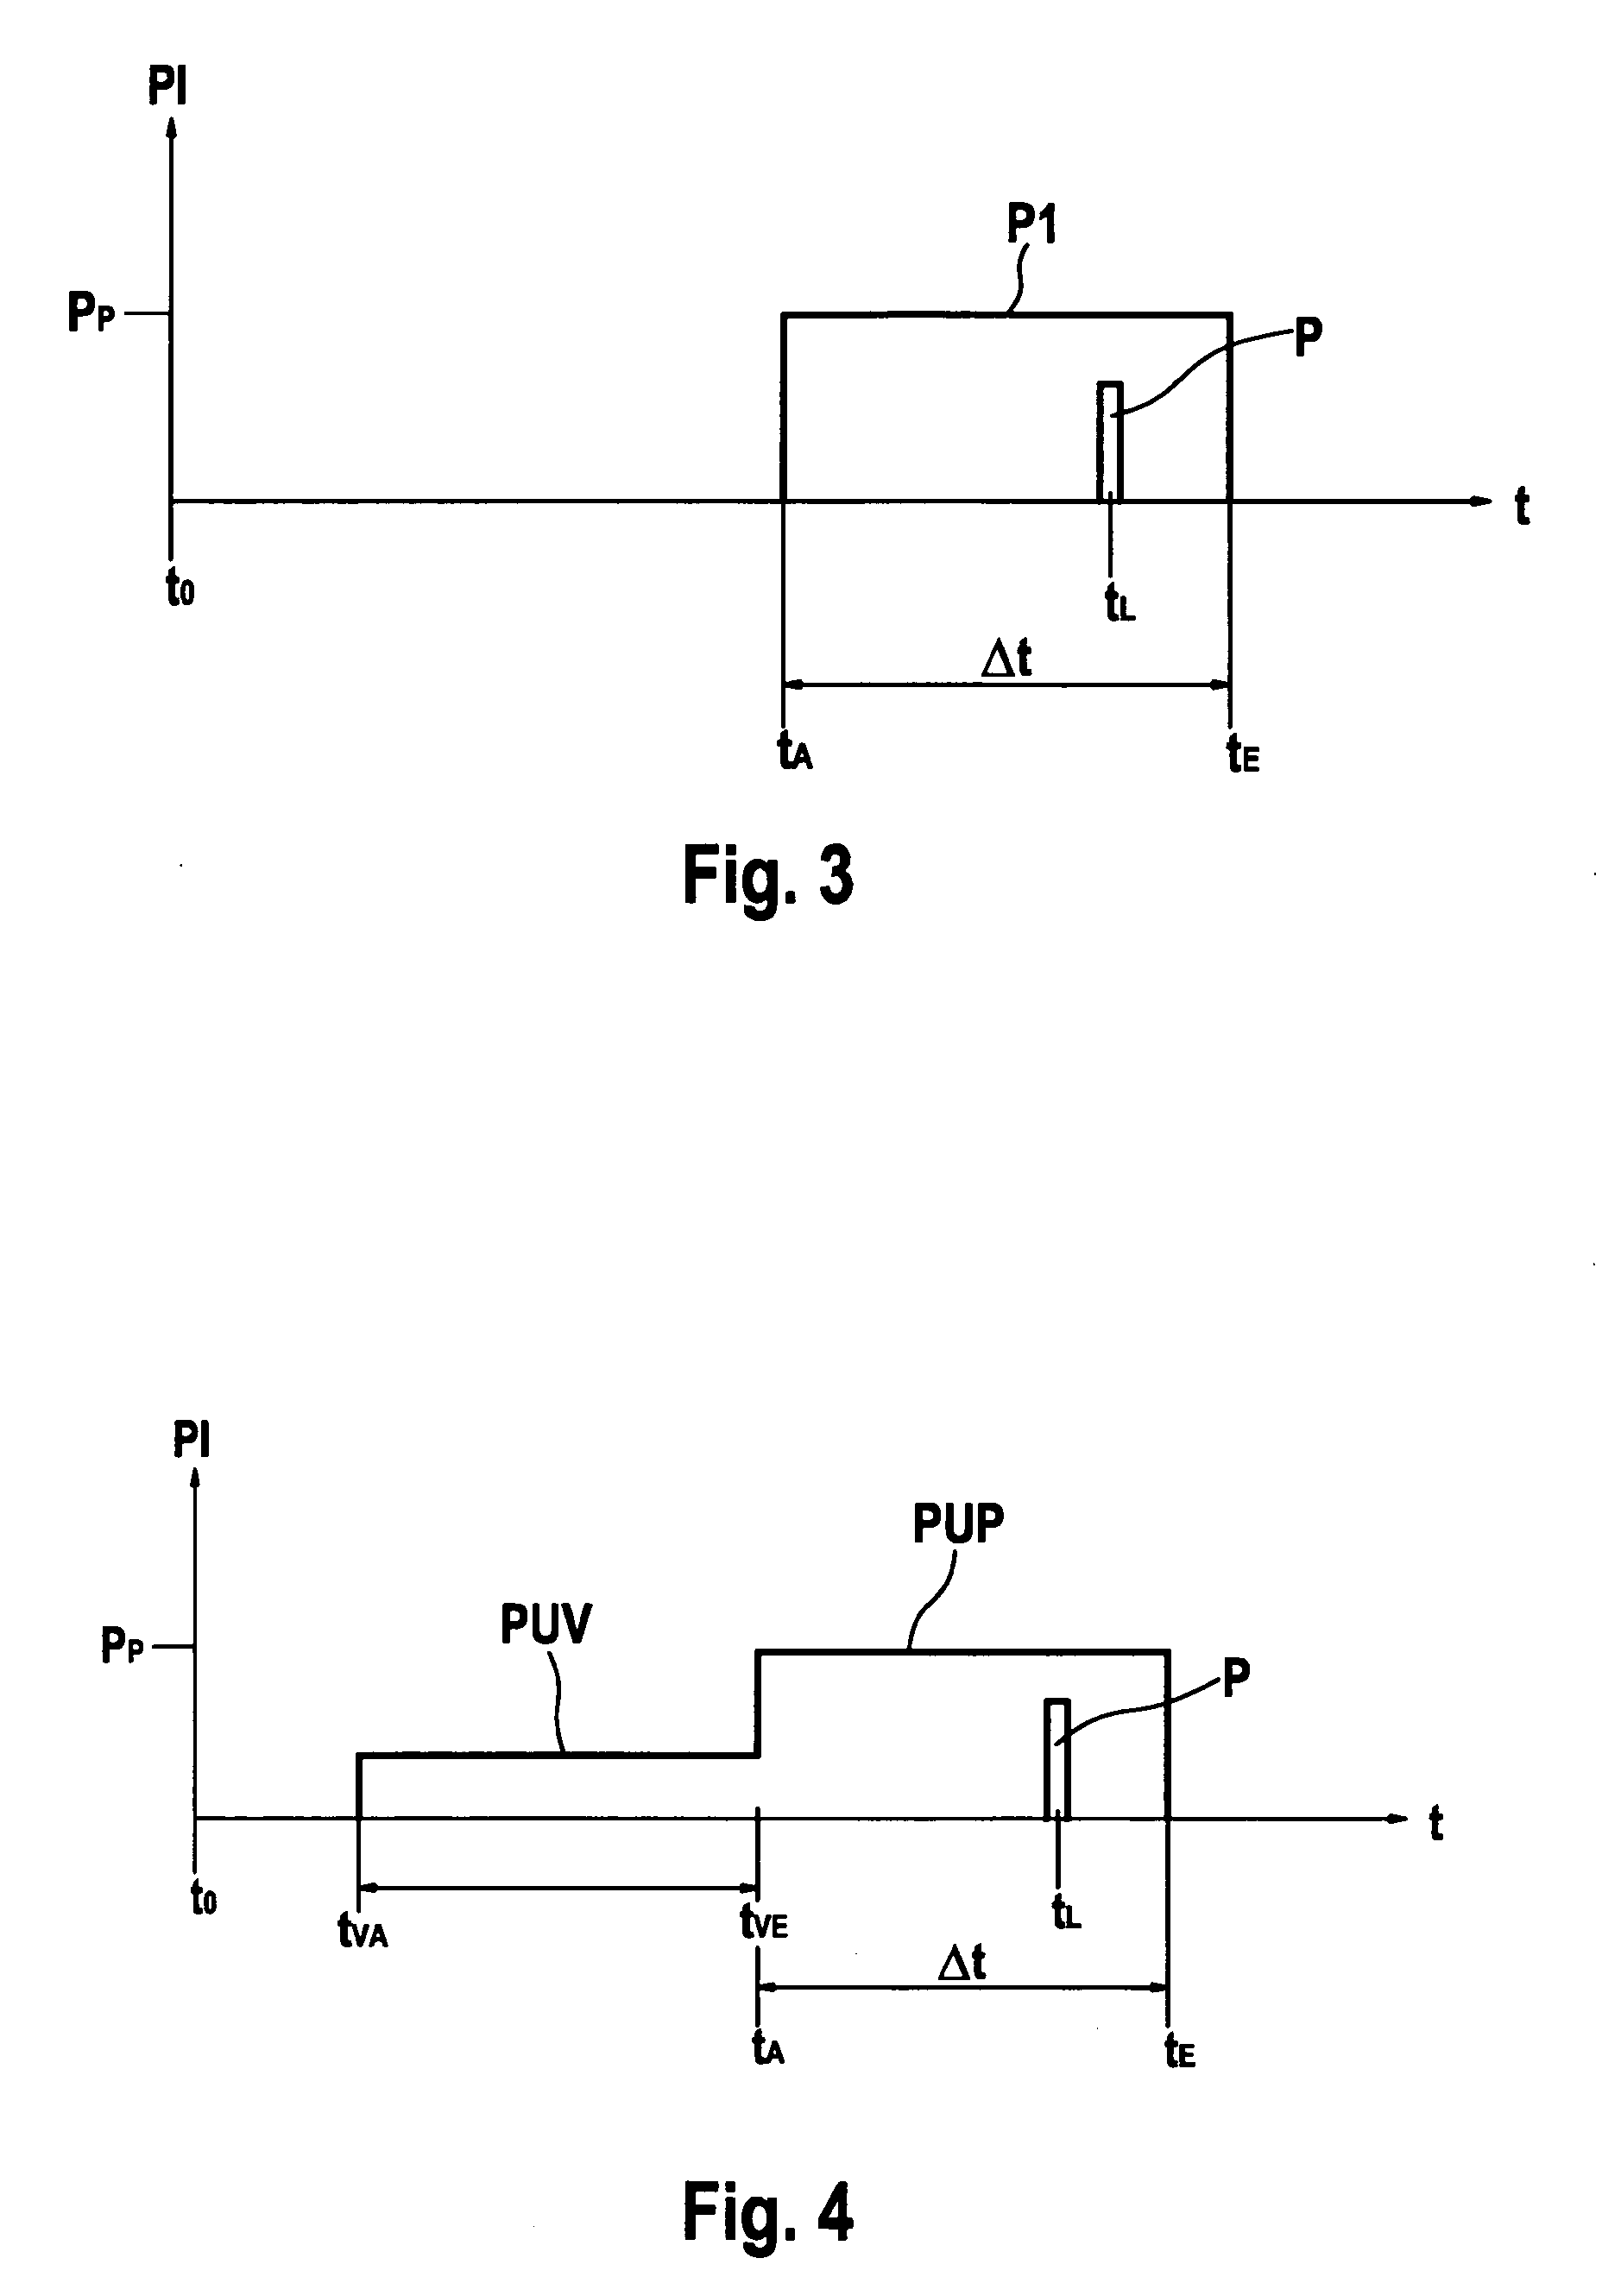 Method for operating a laser as an ignition device of an internal combustion engine